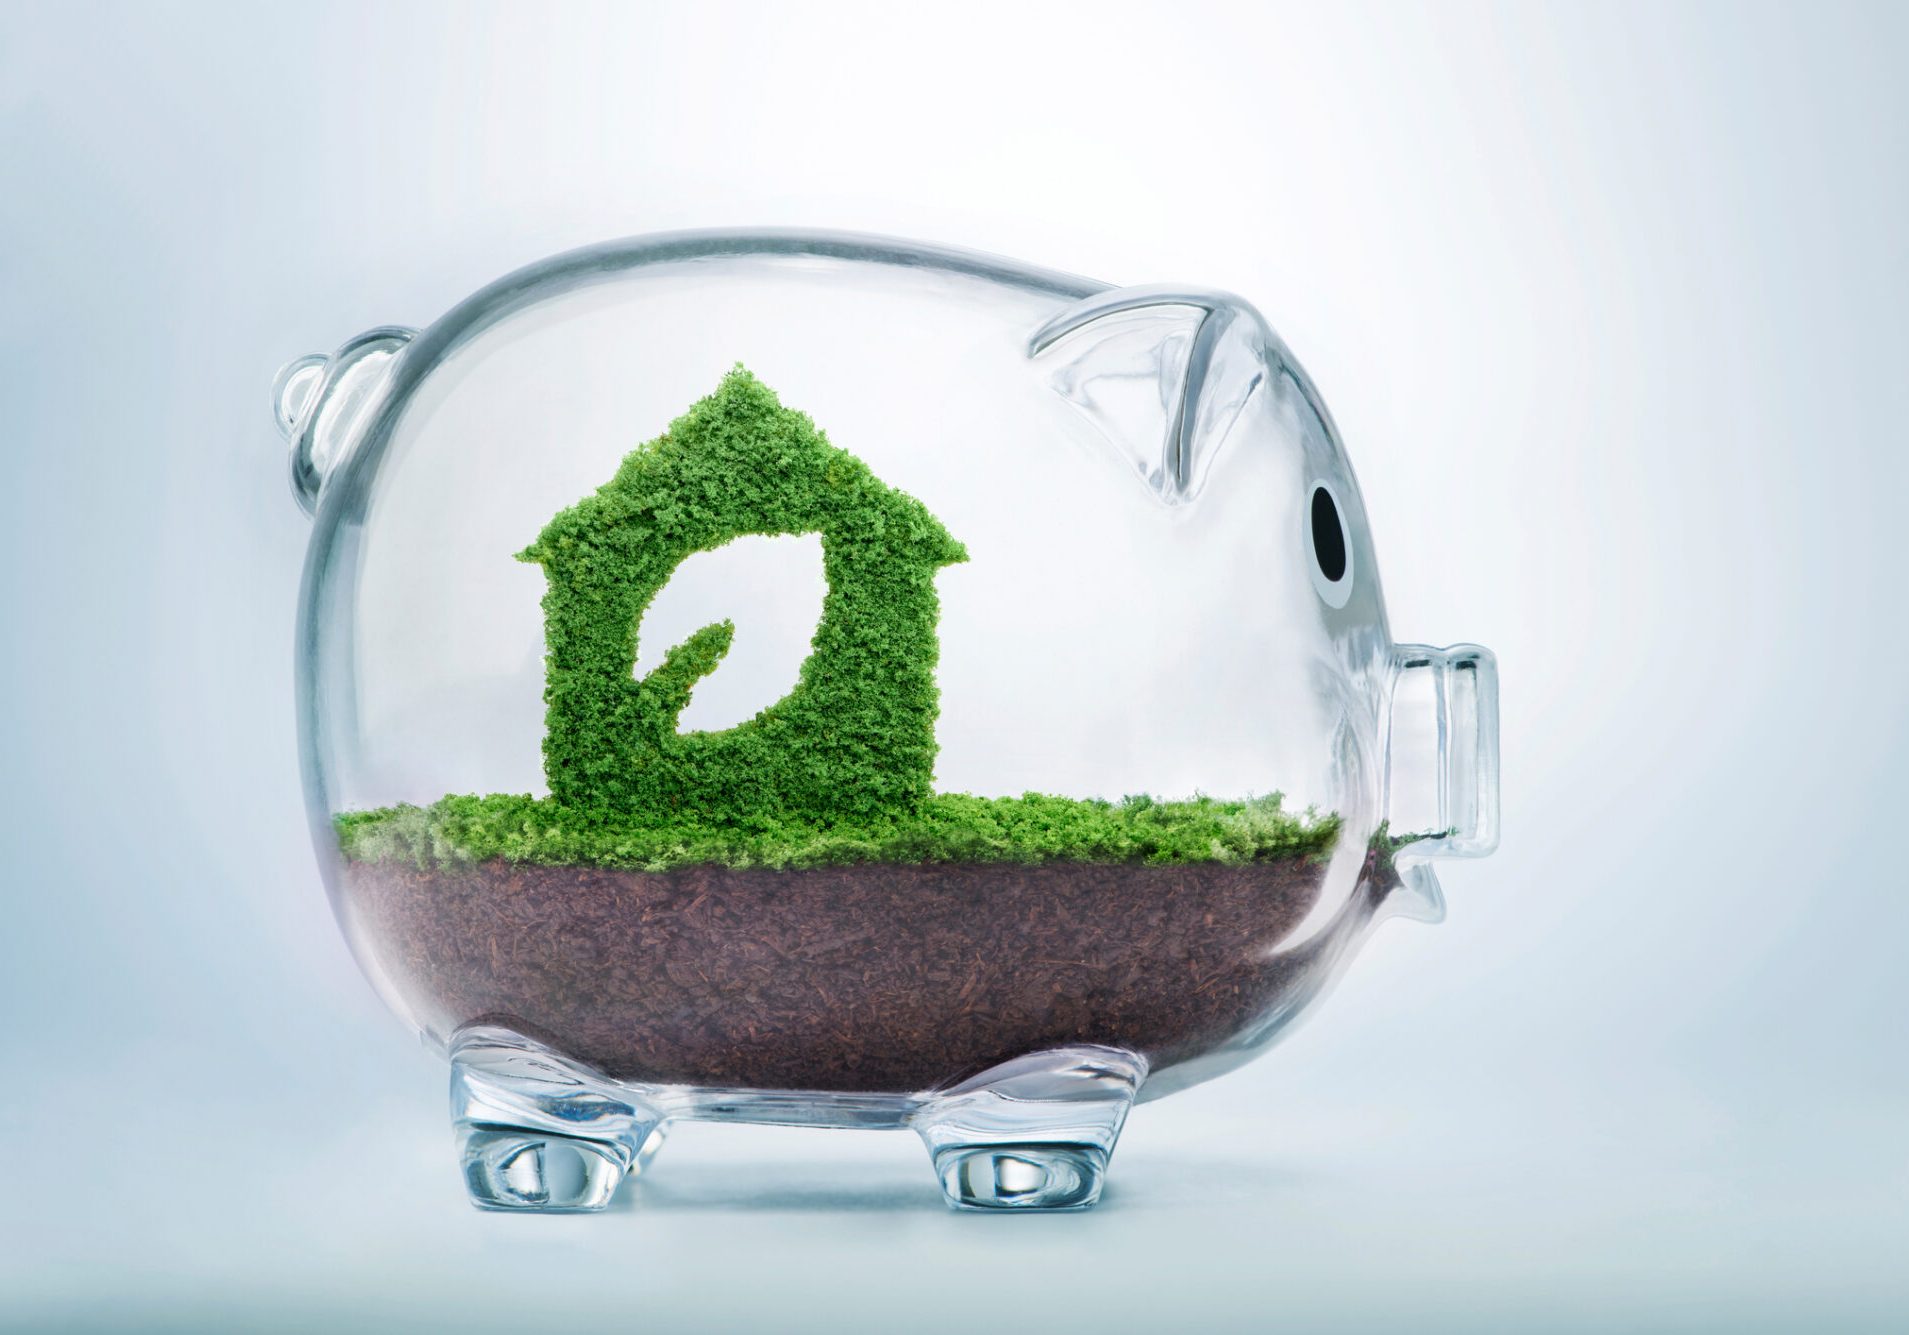 Nature is home concept. Grass growing in the shape of a house with a cut out leaf, inside a transparent piggy bank, symbolising the need to invest in sustainable homes, to protect the environment and to reconnect with nature.